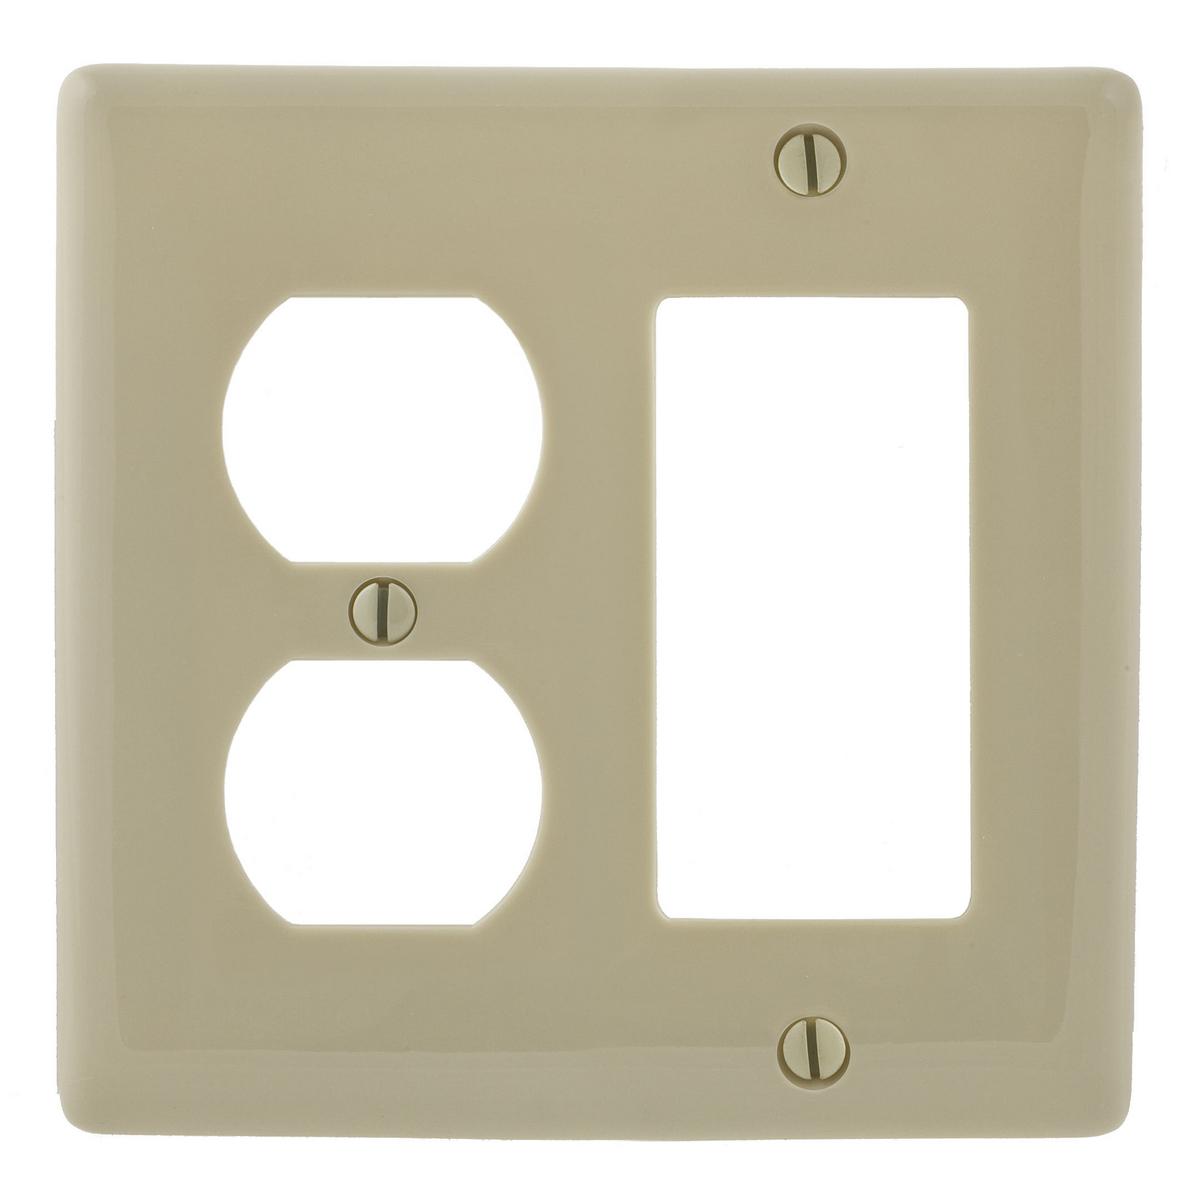 Hubbell NPJ826I Wallplates and Box Covers, Wallplate, Nylon, Mid-Sized, 2-Gang, 1) Duplex 1) Decorator, Ivory  ; Reinforcement ribs for extra strength ; High-impact, self-extinguishing nylon material ; Captive screw feature holds mounting screw in place ; Standard Size i